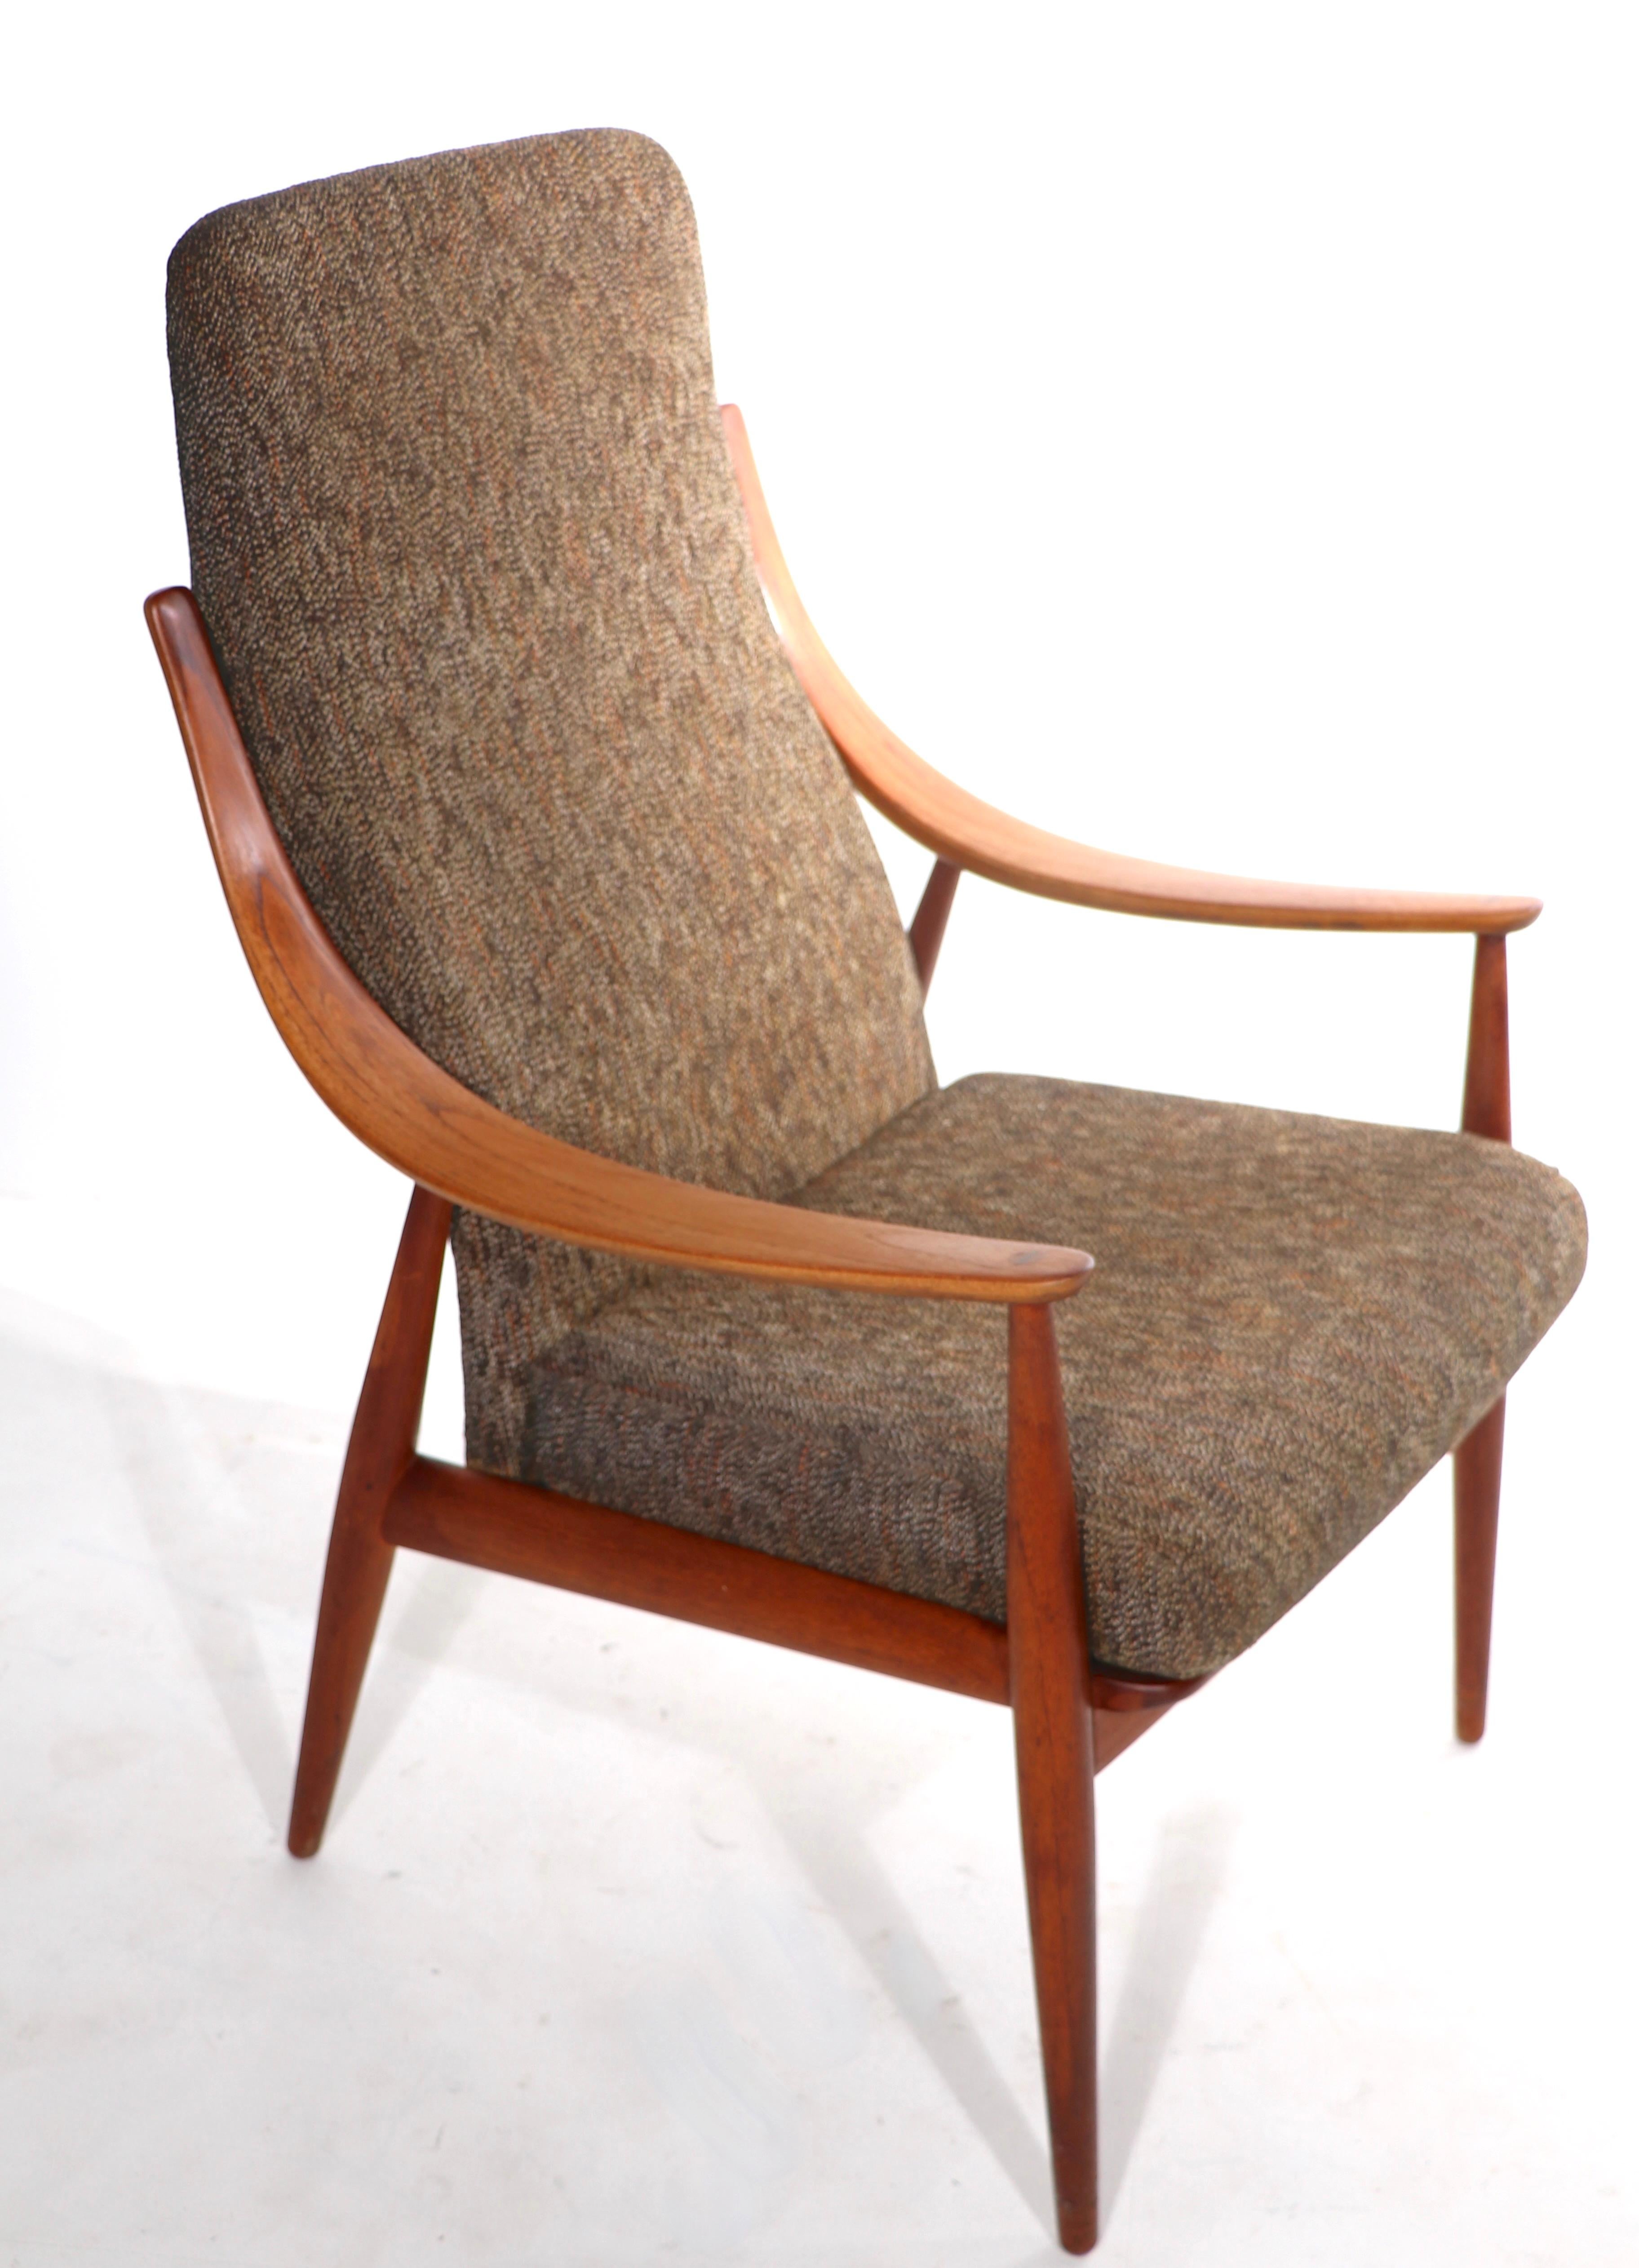 Mid-20th Century High Back Lounge Chair by Hvidt and Molgaard, Nielsen For Sale